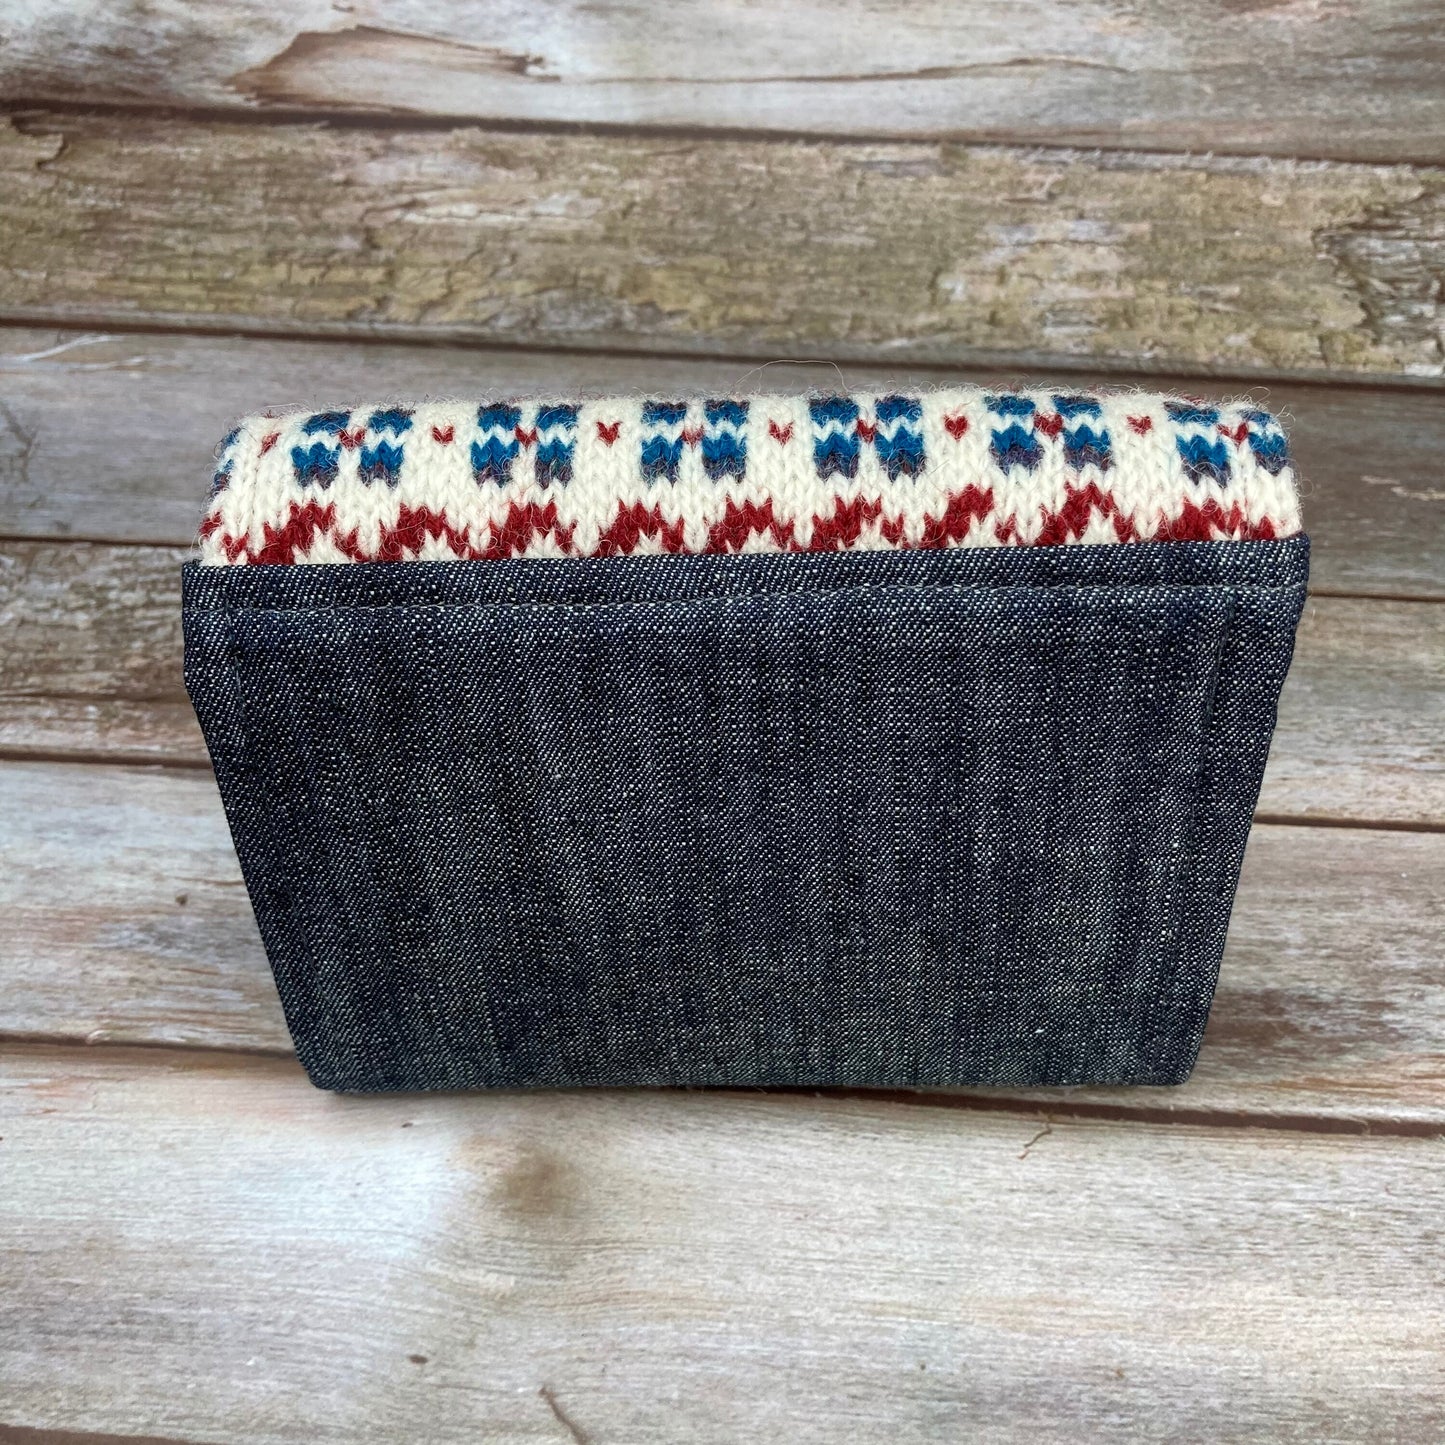 Blue Red & White Fair Isle Purse , Unique Knitted Purse Wallet, Handmade in Shetland - Uphouse Crafts